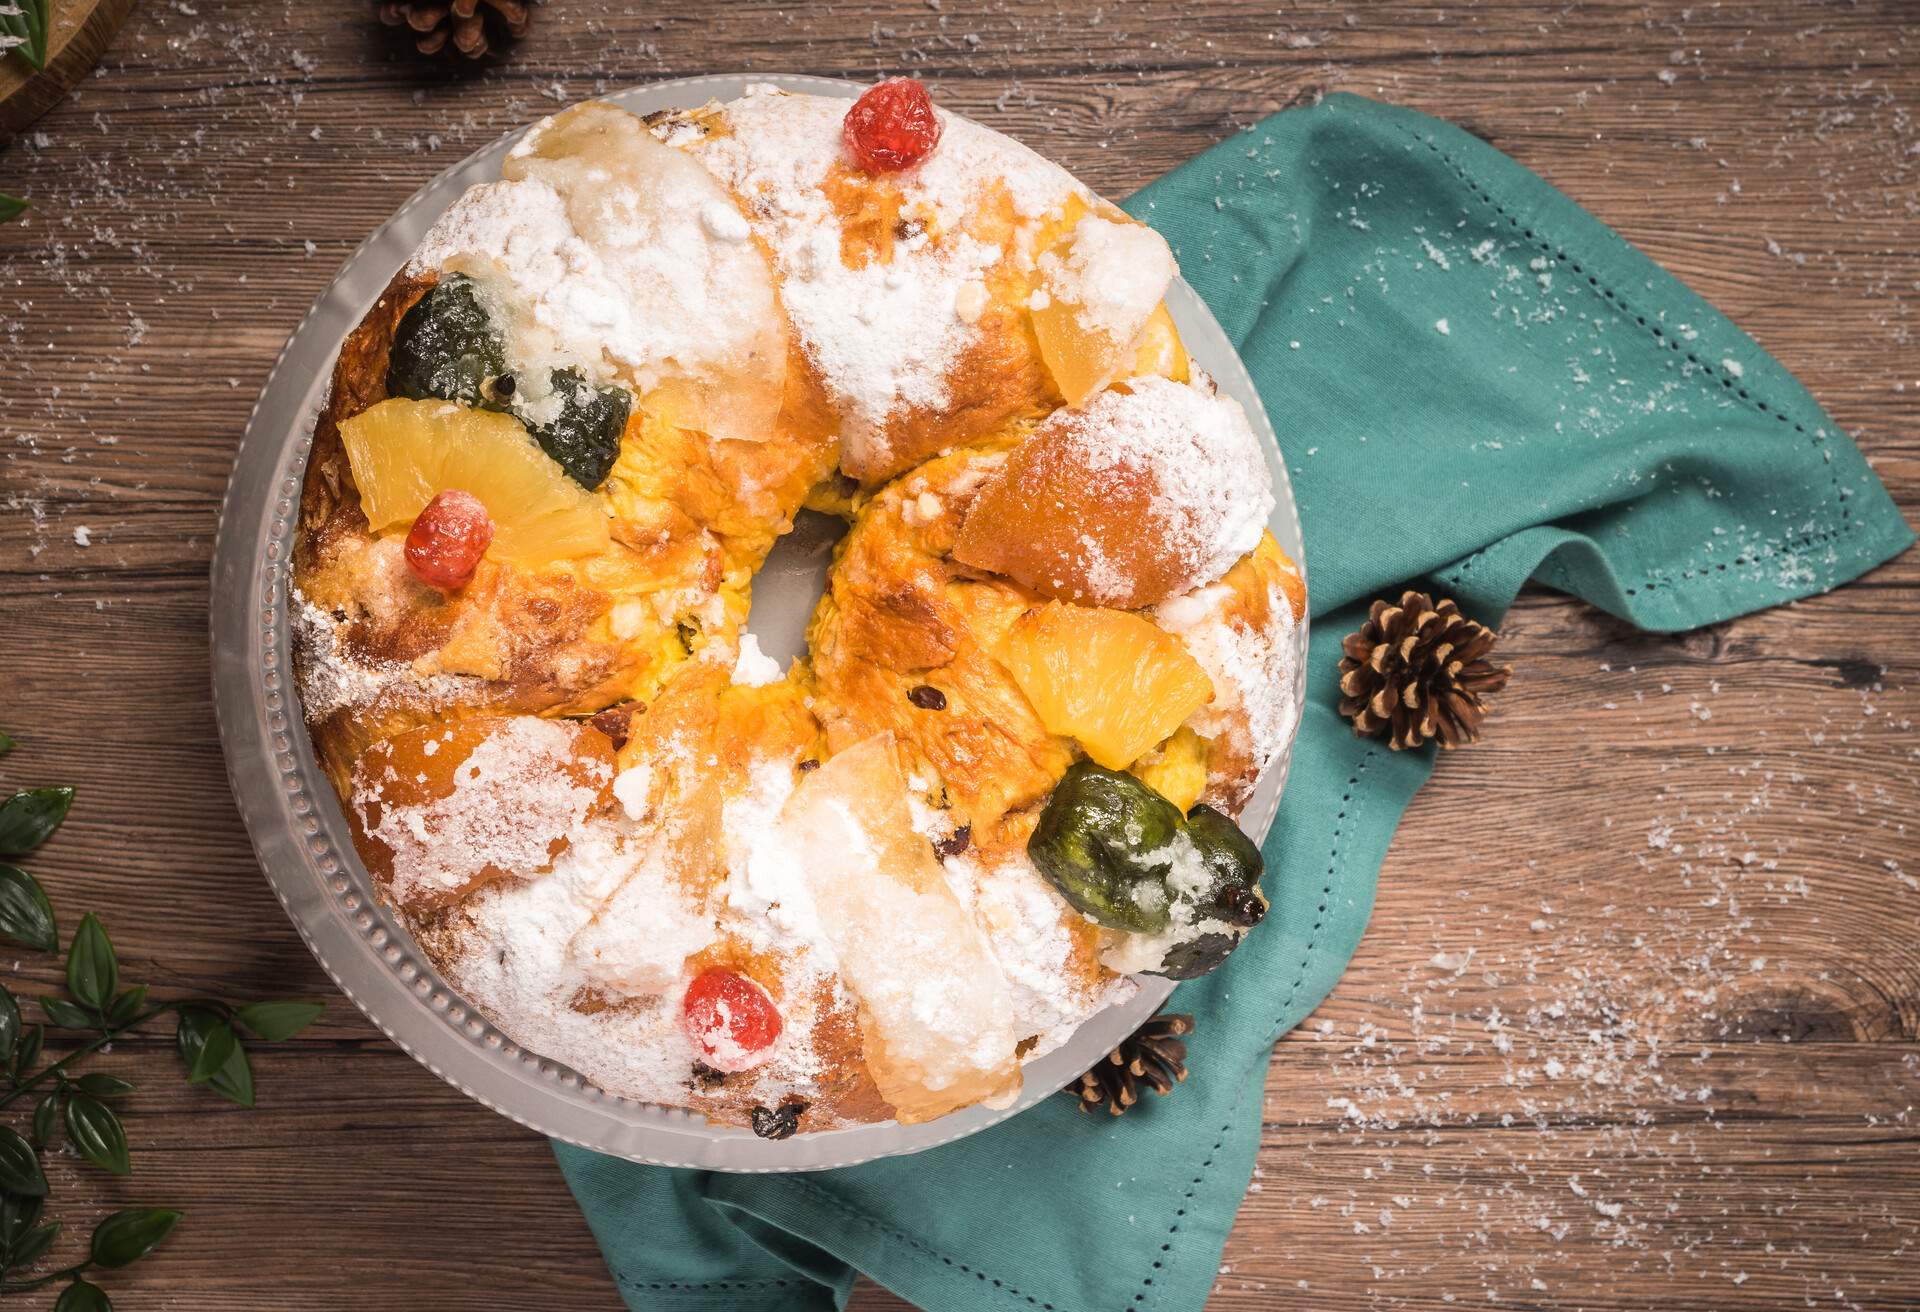 Bolo do Rei or King's Cake, Made for Christmas, Carnavale or Mardi Gras with Present Wrapping in Background